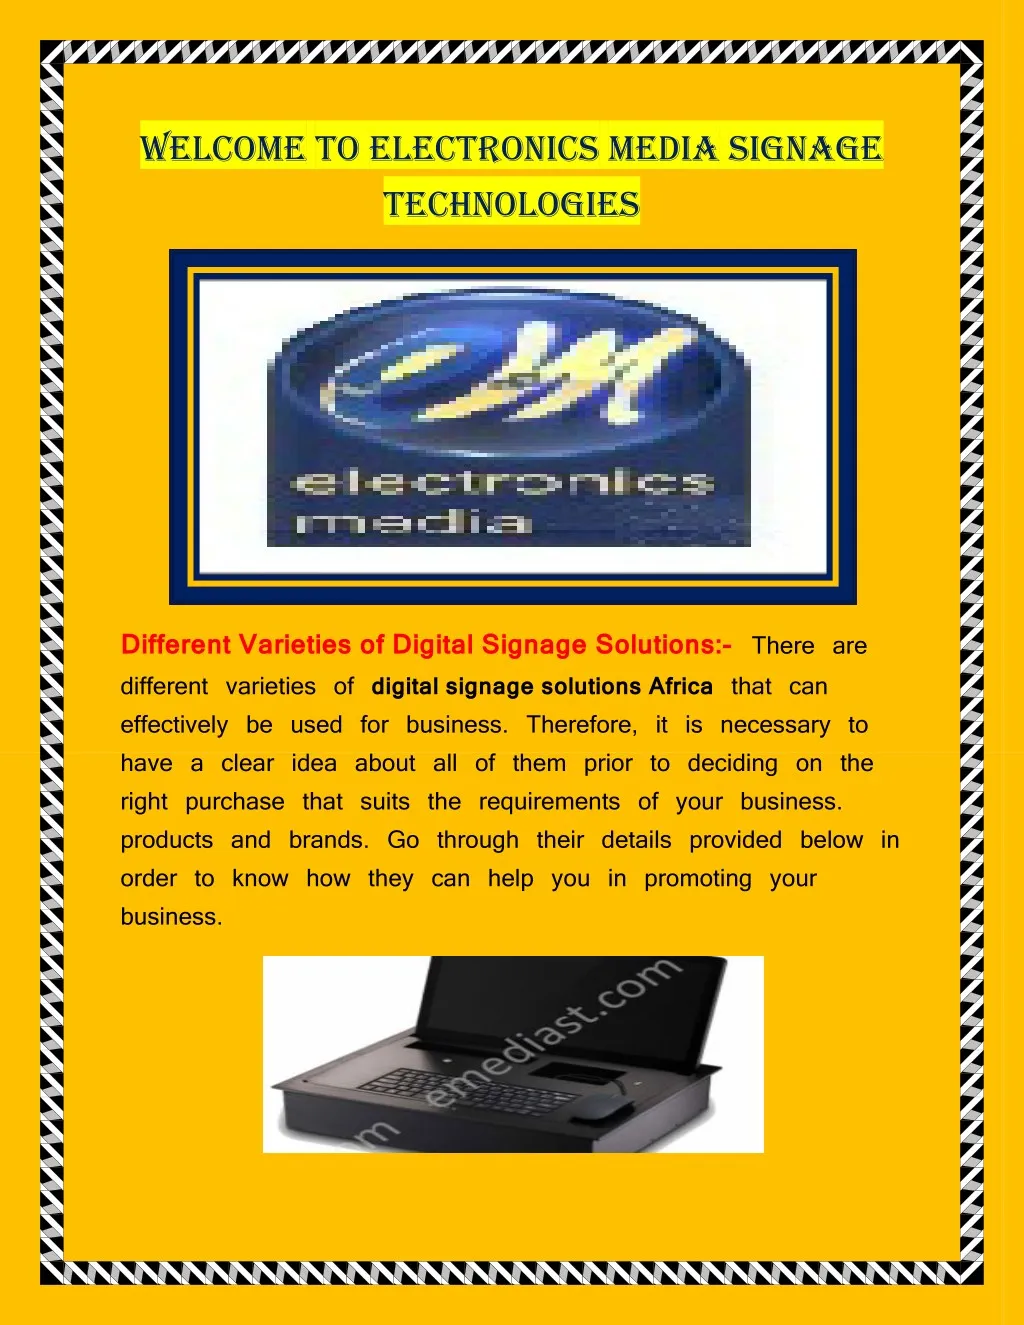 welcome to electronics media signage technologies